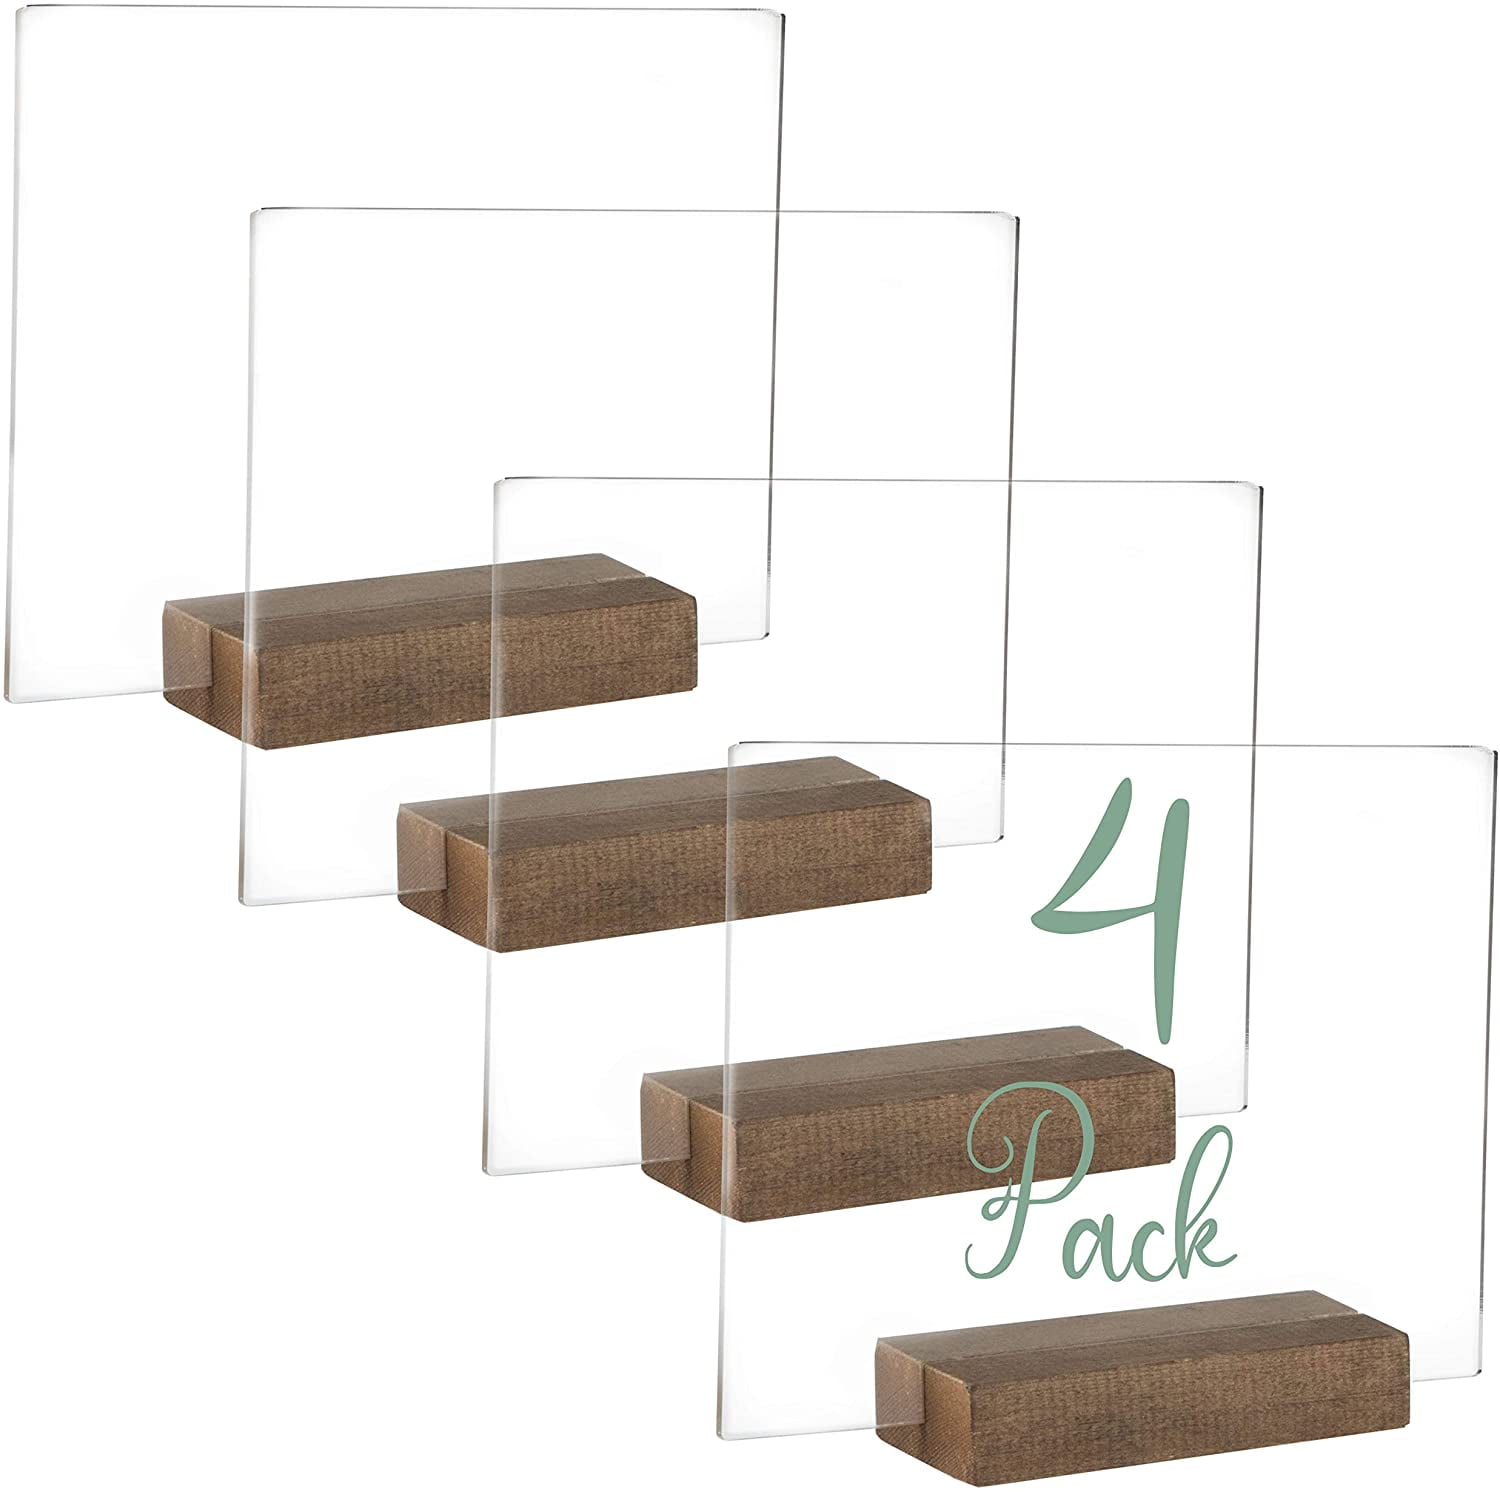 QIFEI Acrylic Sign with Wood Stands, Blank Acrylic Signs with Base, Acrylic  Sheet Holder Stand Wood for Wedding Table Number Holder, Table Display  Stand Signs for Party Events, Office 